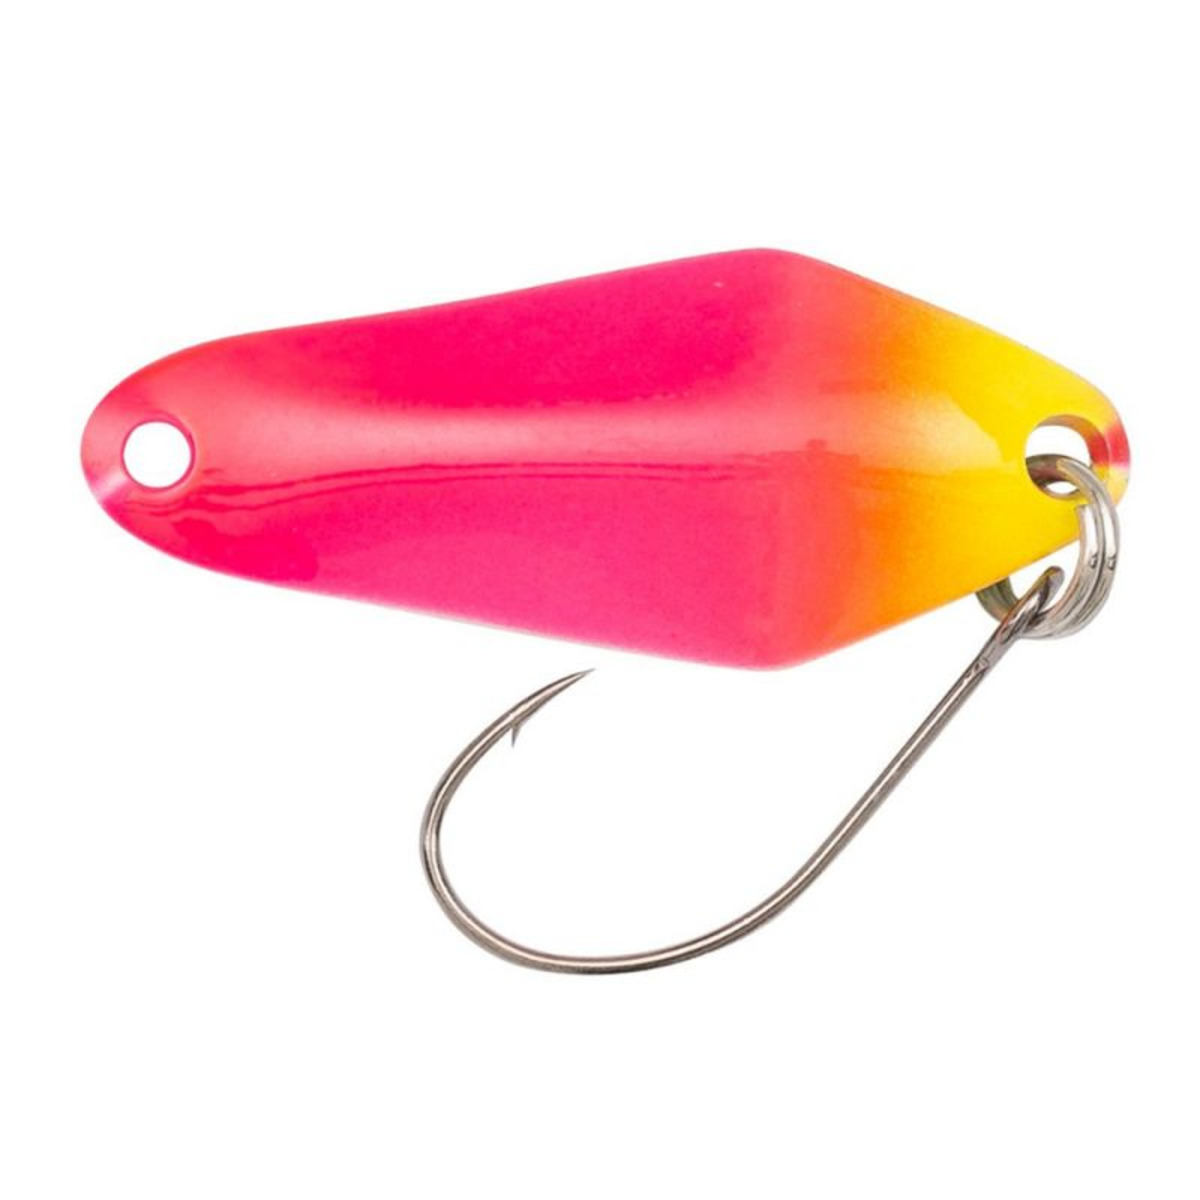 Berkley Area Game Spoons Chisai - 1.8 g - 2.00 cm - Chartreuse Front-Fucsia Back